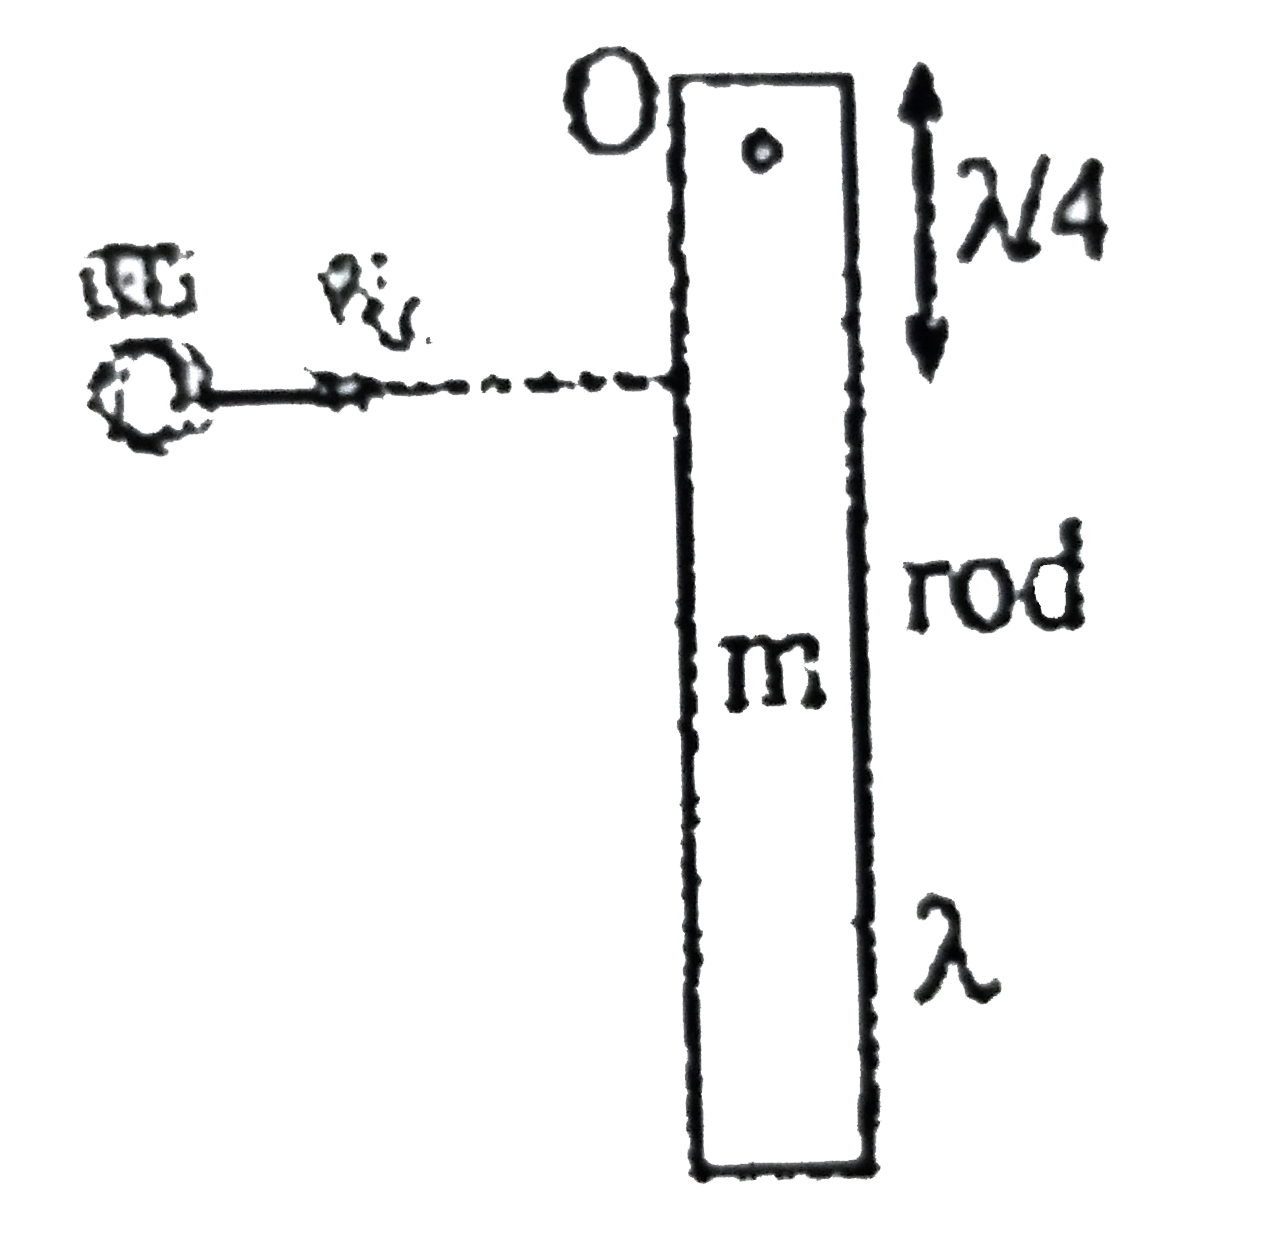 Rod of m and length l is free to rotate about point U in vertical plane. A particle having same mass m moving horizontally with velocity v(0) his the rod perpendicular at distance (l)/(4) from the top end 'O' and stops. Find impulse due to hinge on the rod due to collision.